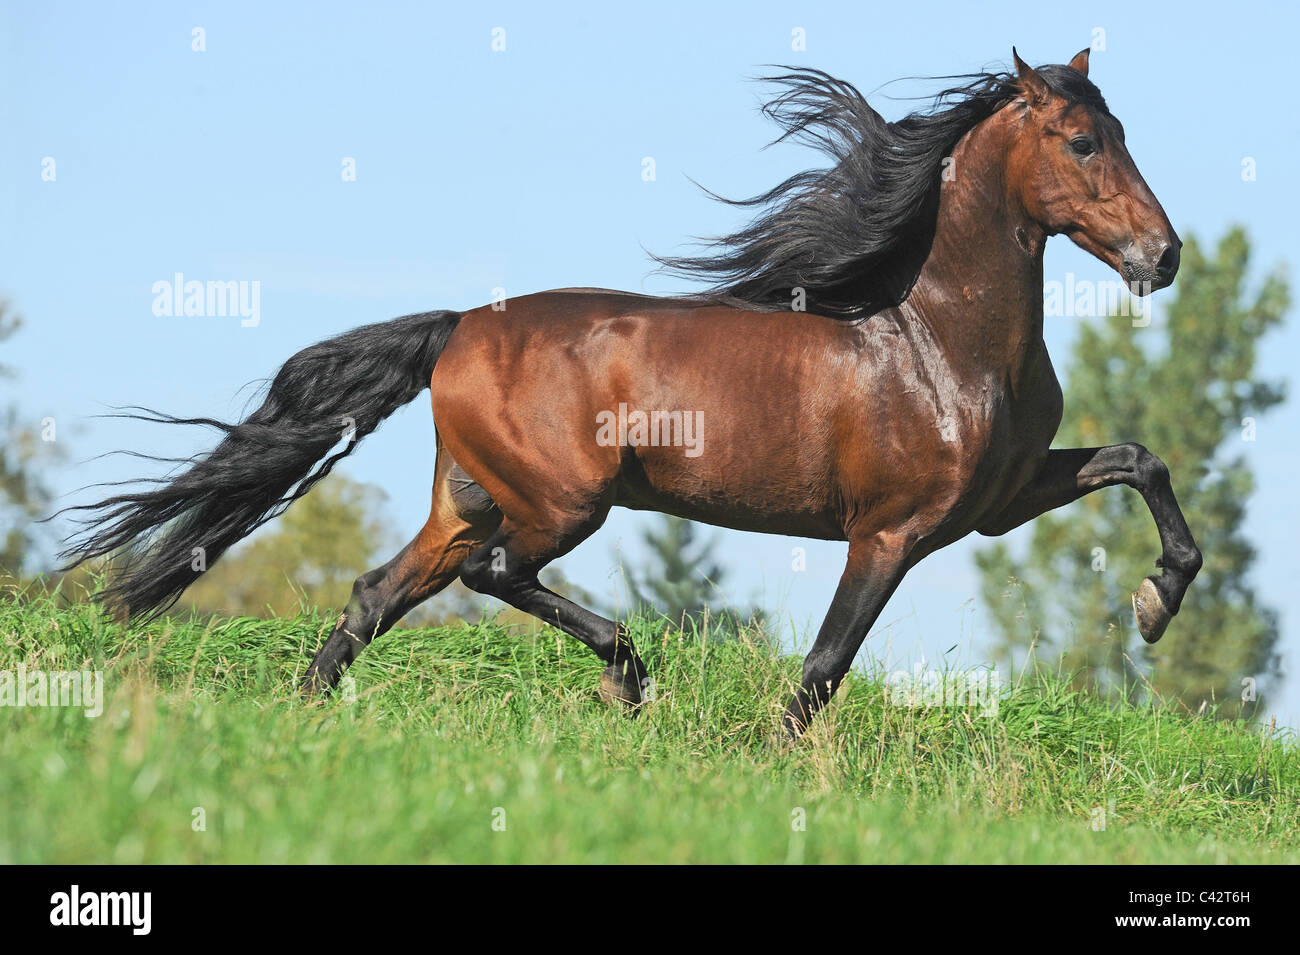 Andalusian Horse (Equus ferus caballus). Bay stallion at a trot on a meadow. Germany. Stock Photo